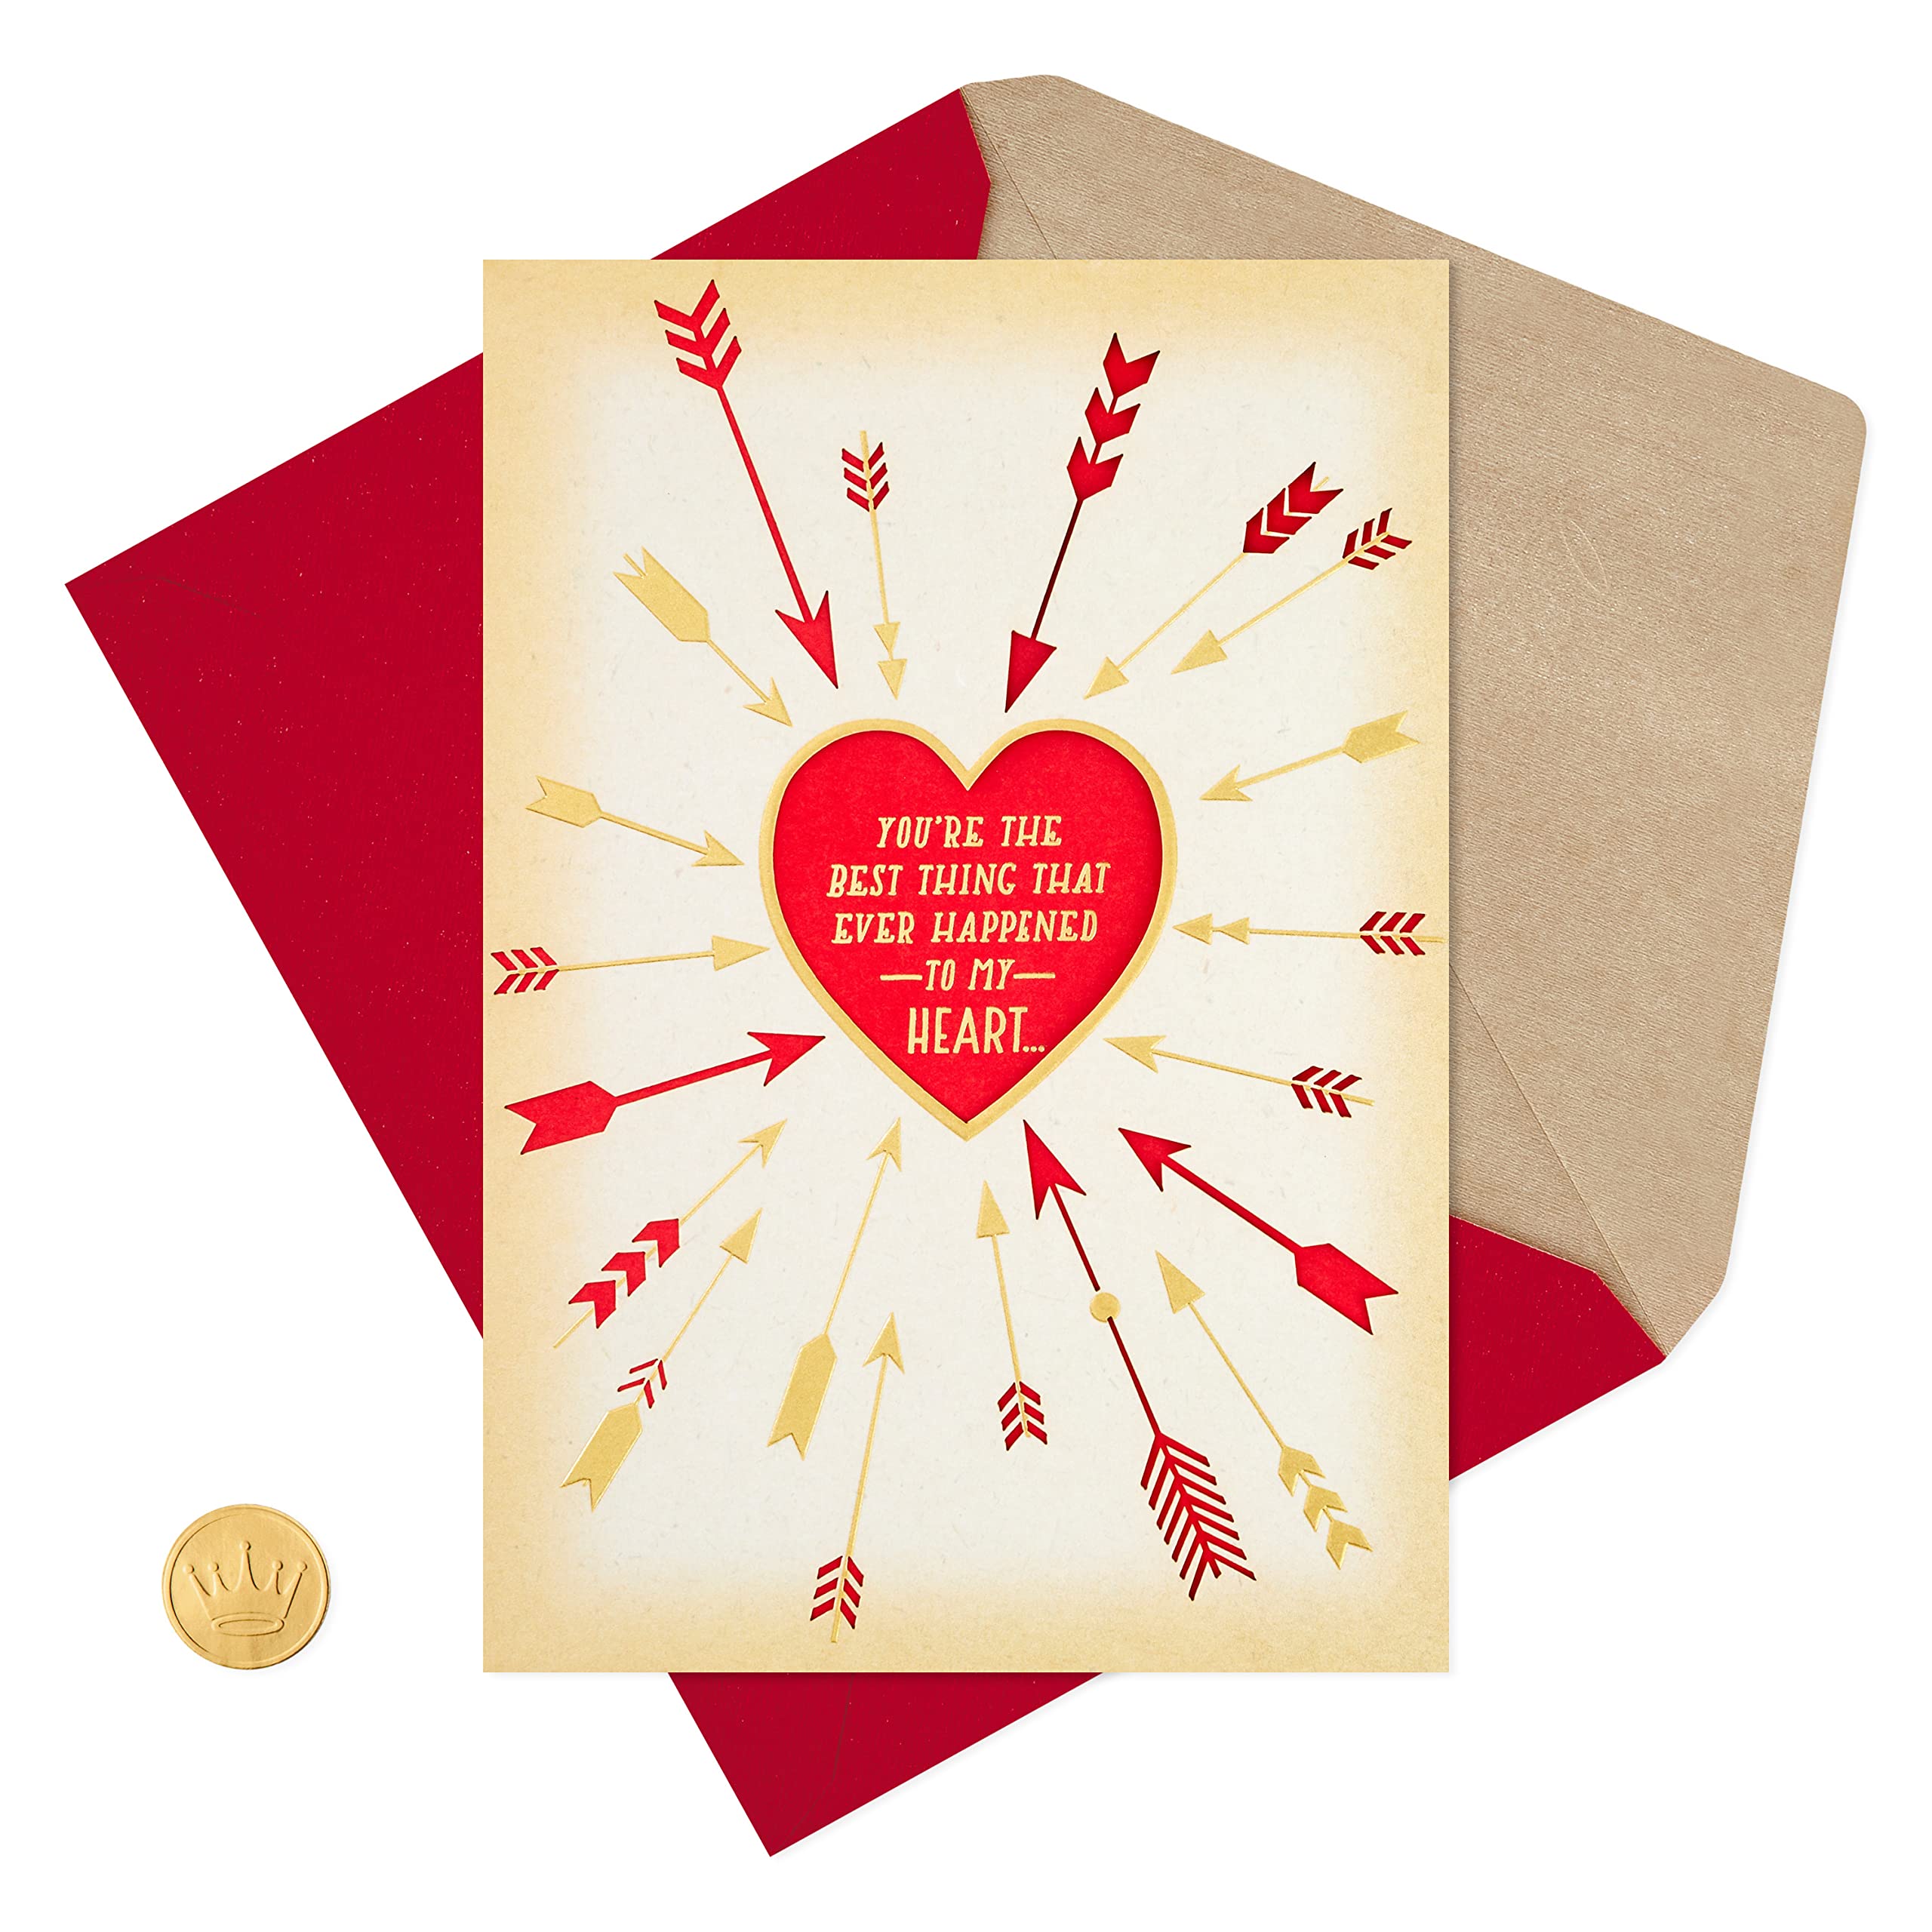 Hallmark Valentine's Day Card for Significant Other (Arrows Around Heart)